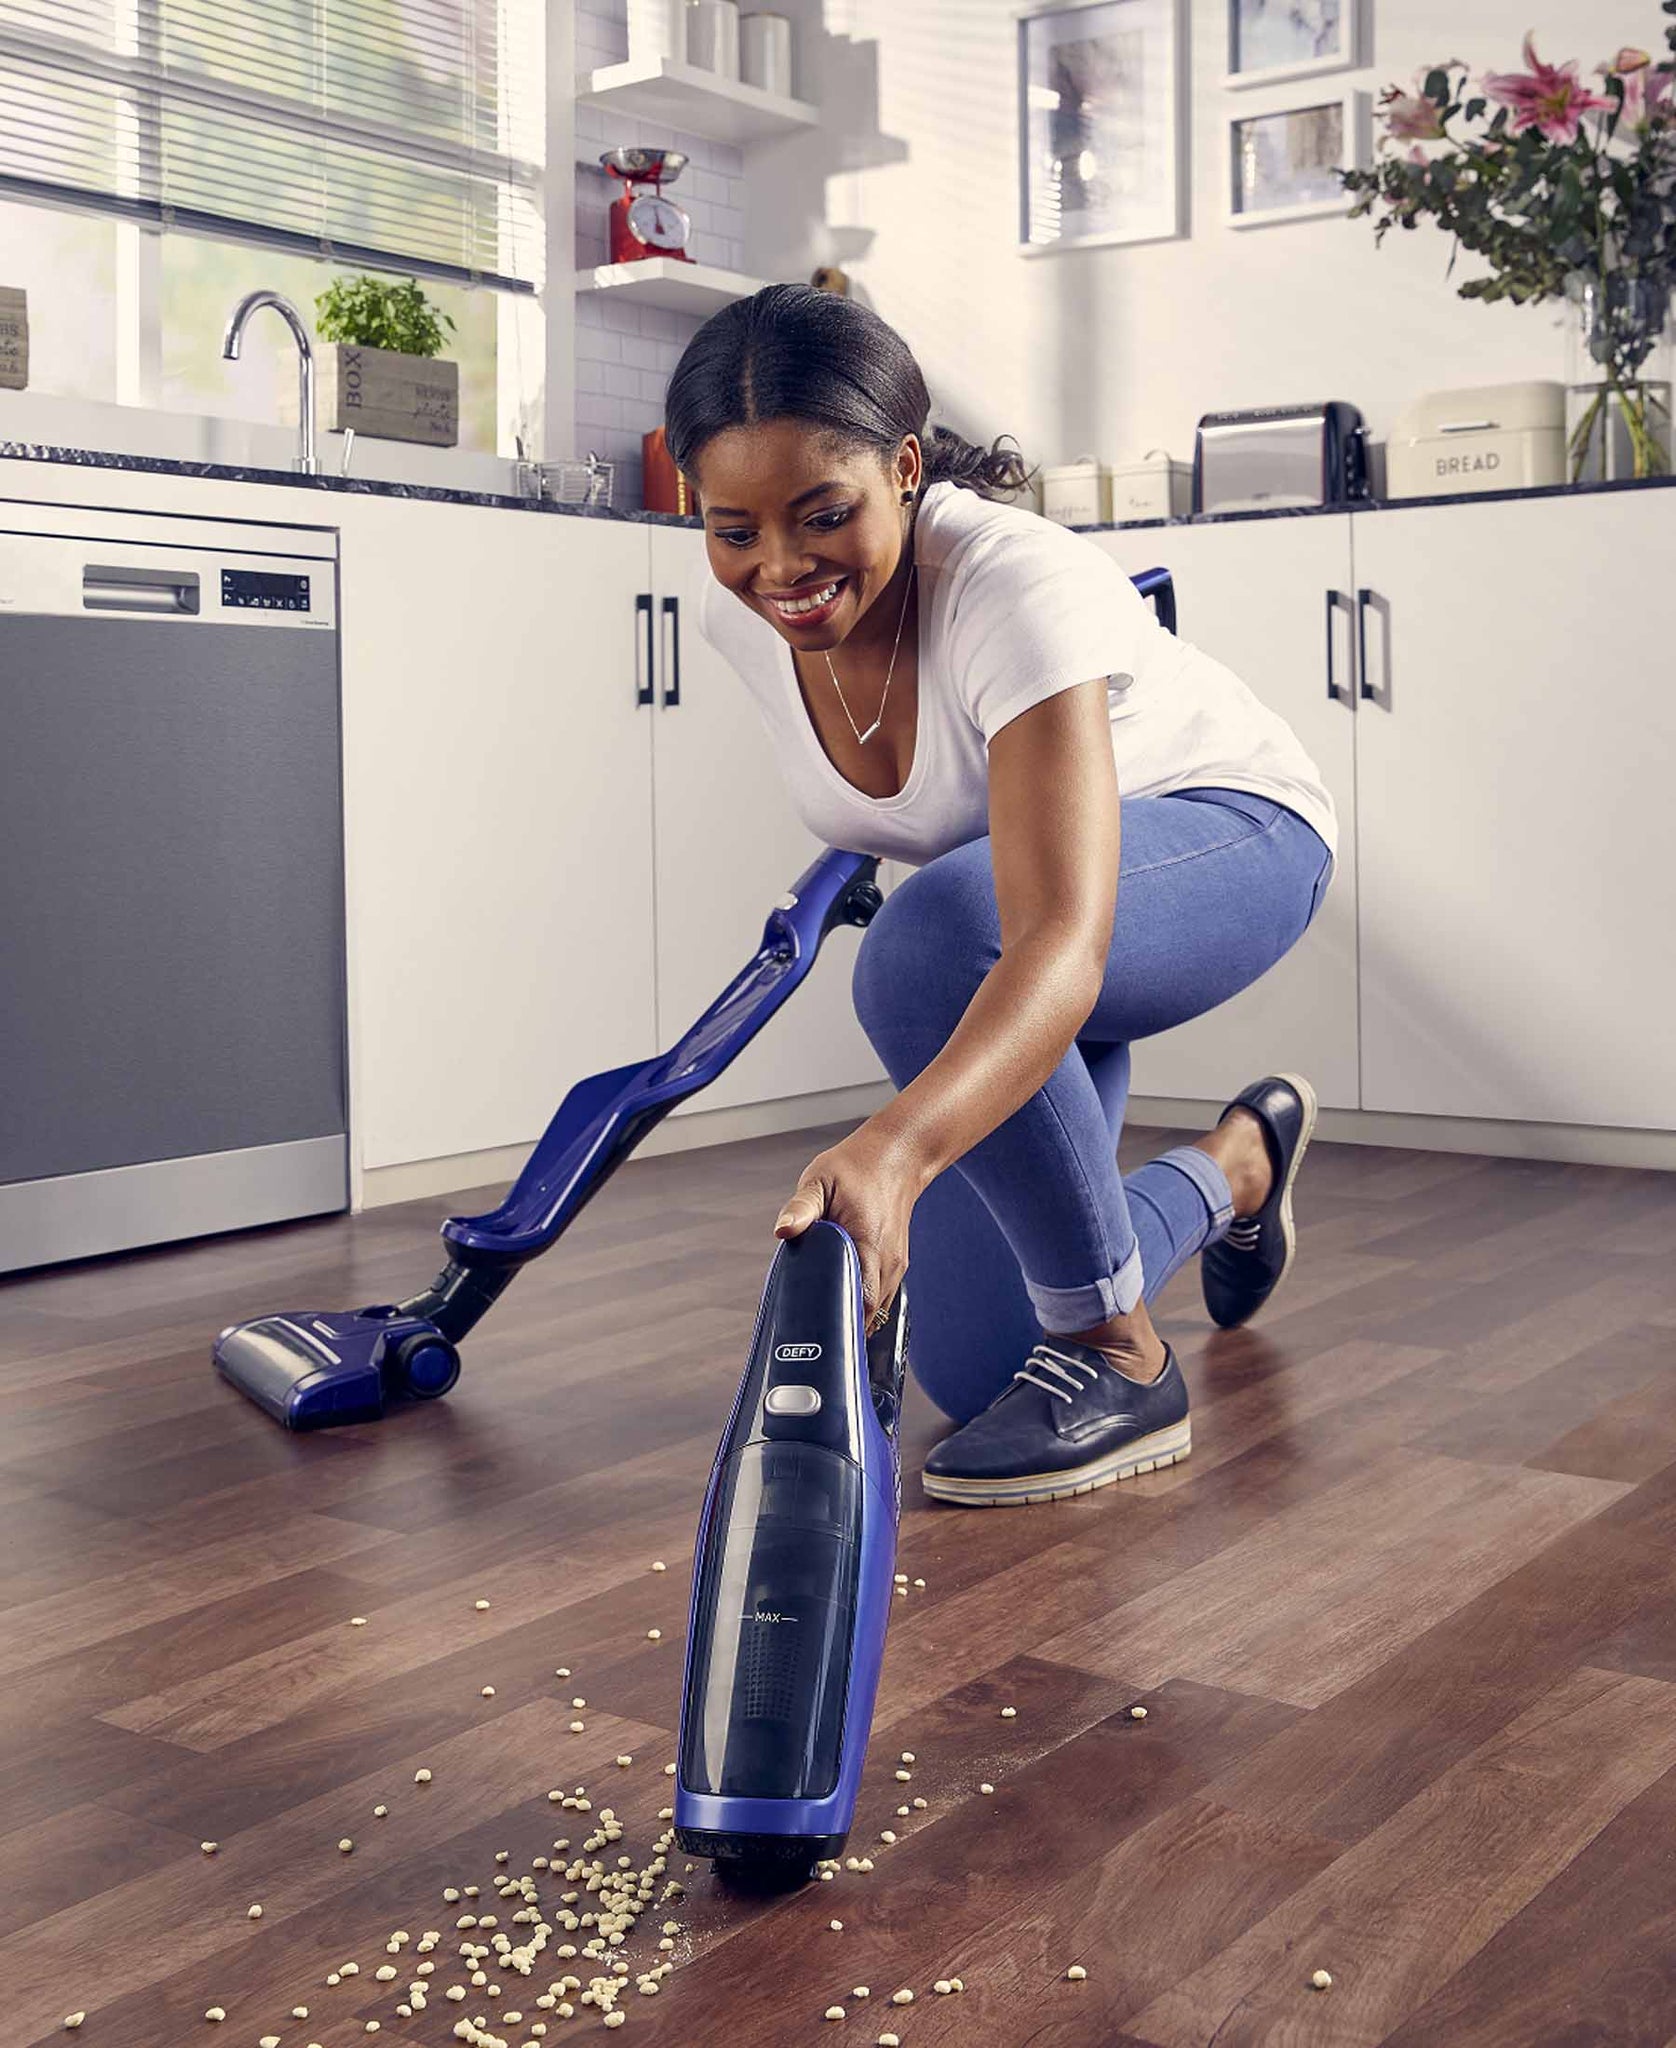 Defy Rechargeable Vacuum Cleaner - Blue